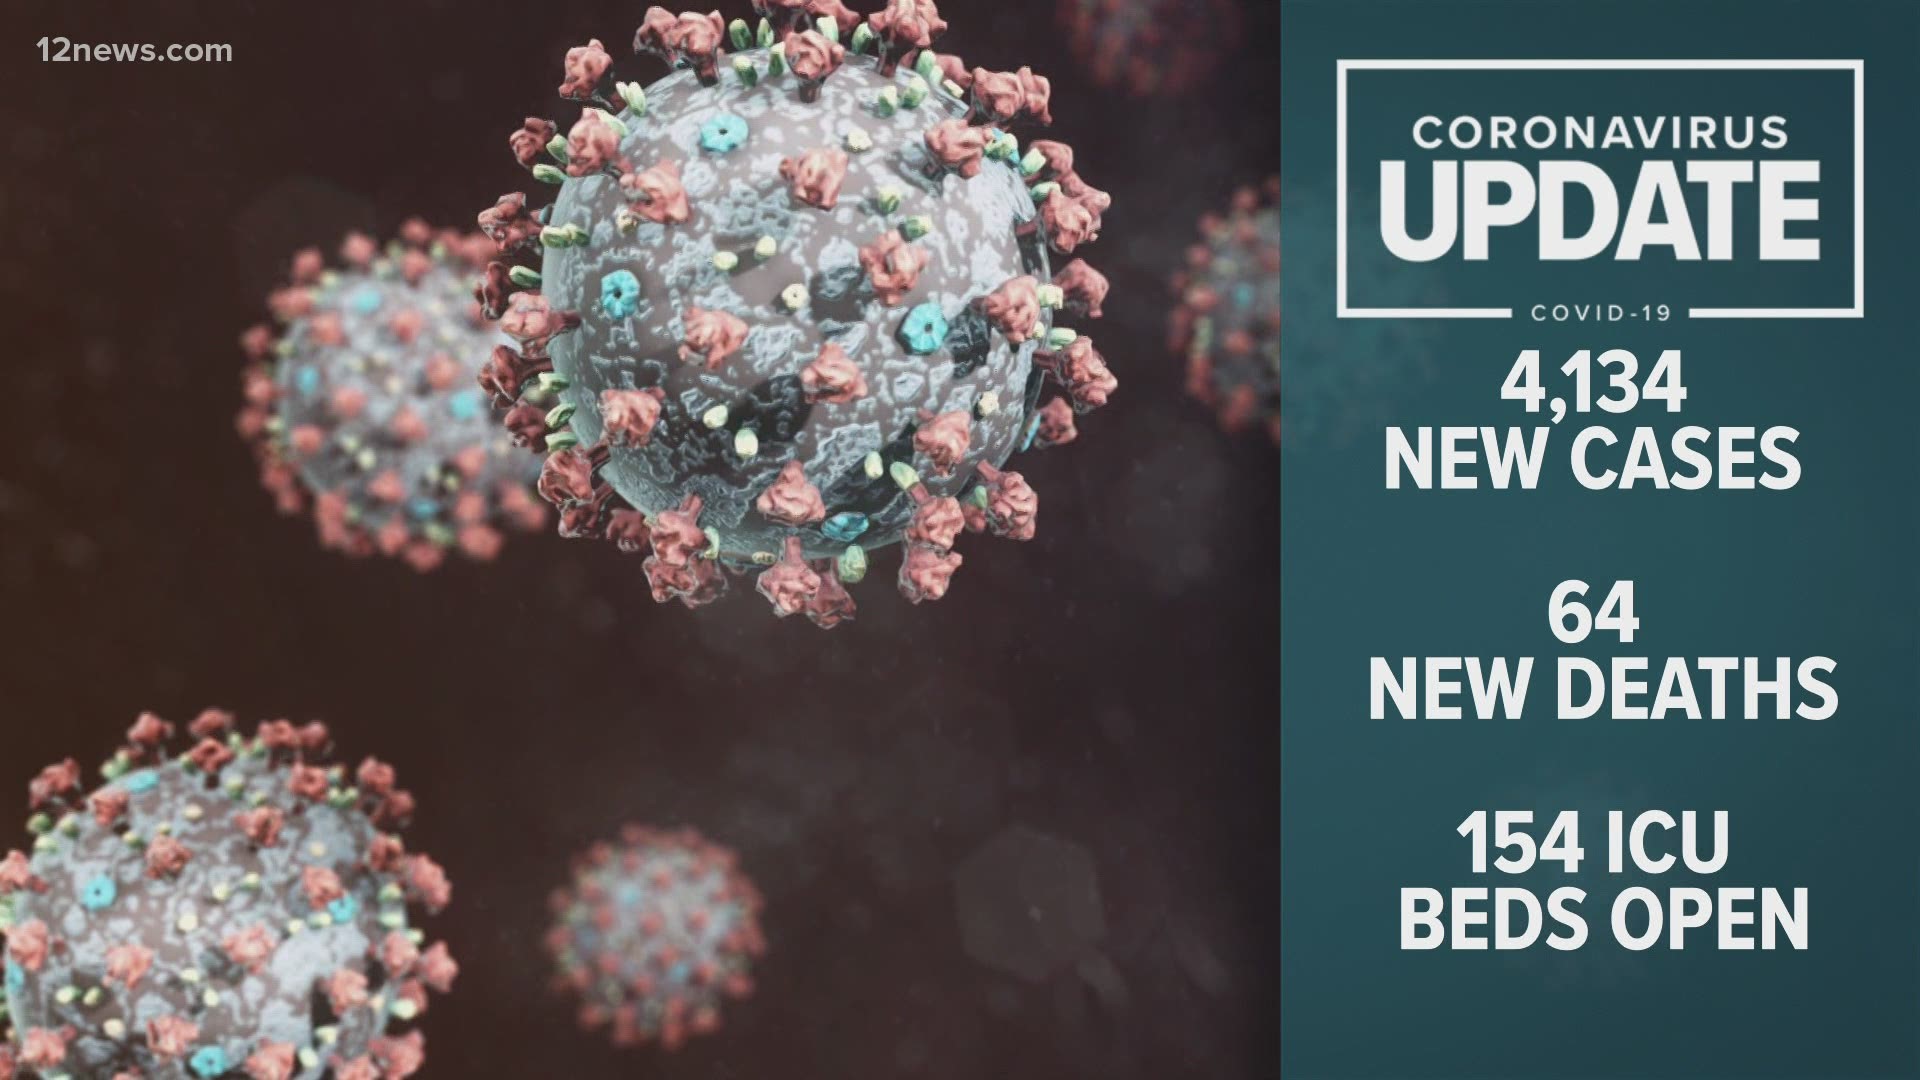 Case of coronavirus in Arizona are on the rise. Tram Mai has an update on the latest numbers for Dec. 16, 2020.